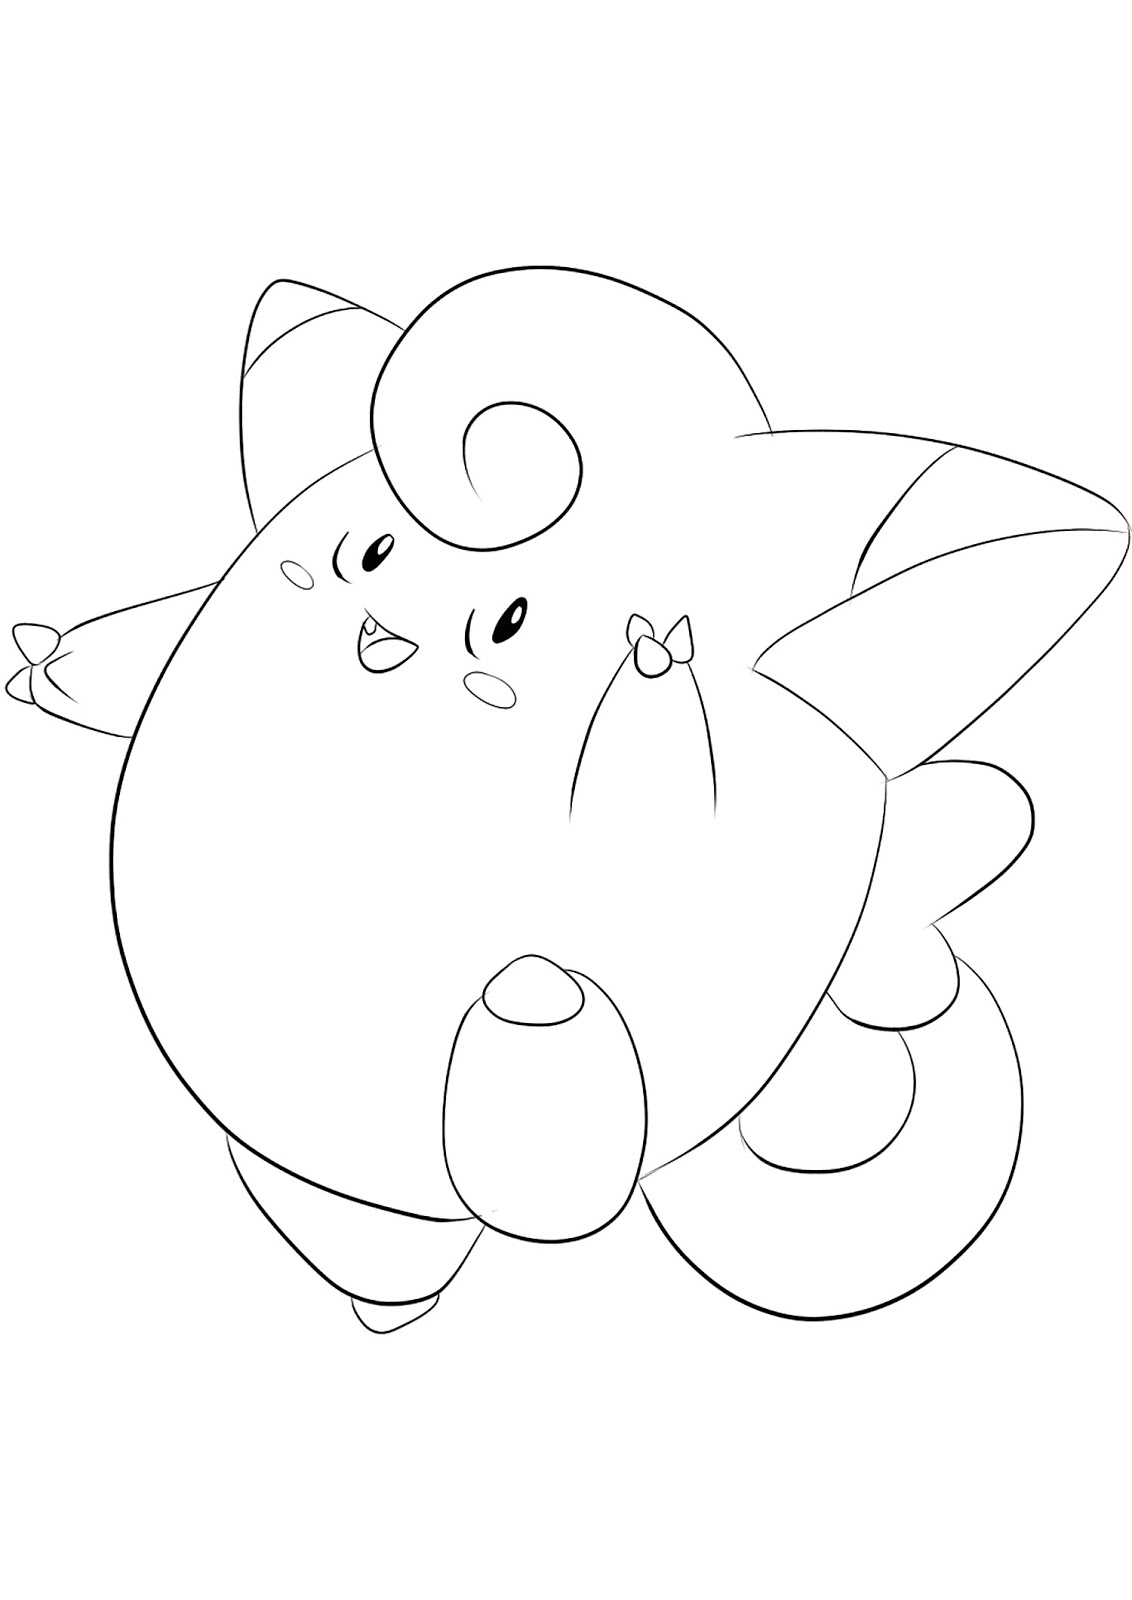 Pokemon Clefairy Coloring Pages to Print - Free Pokemon Coloring Pages